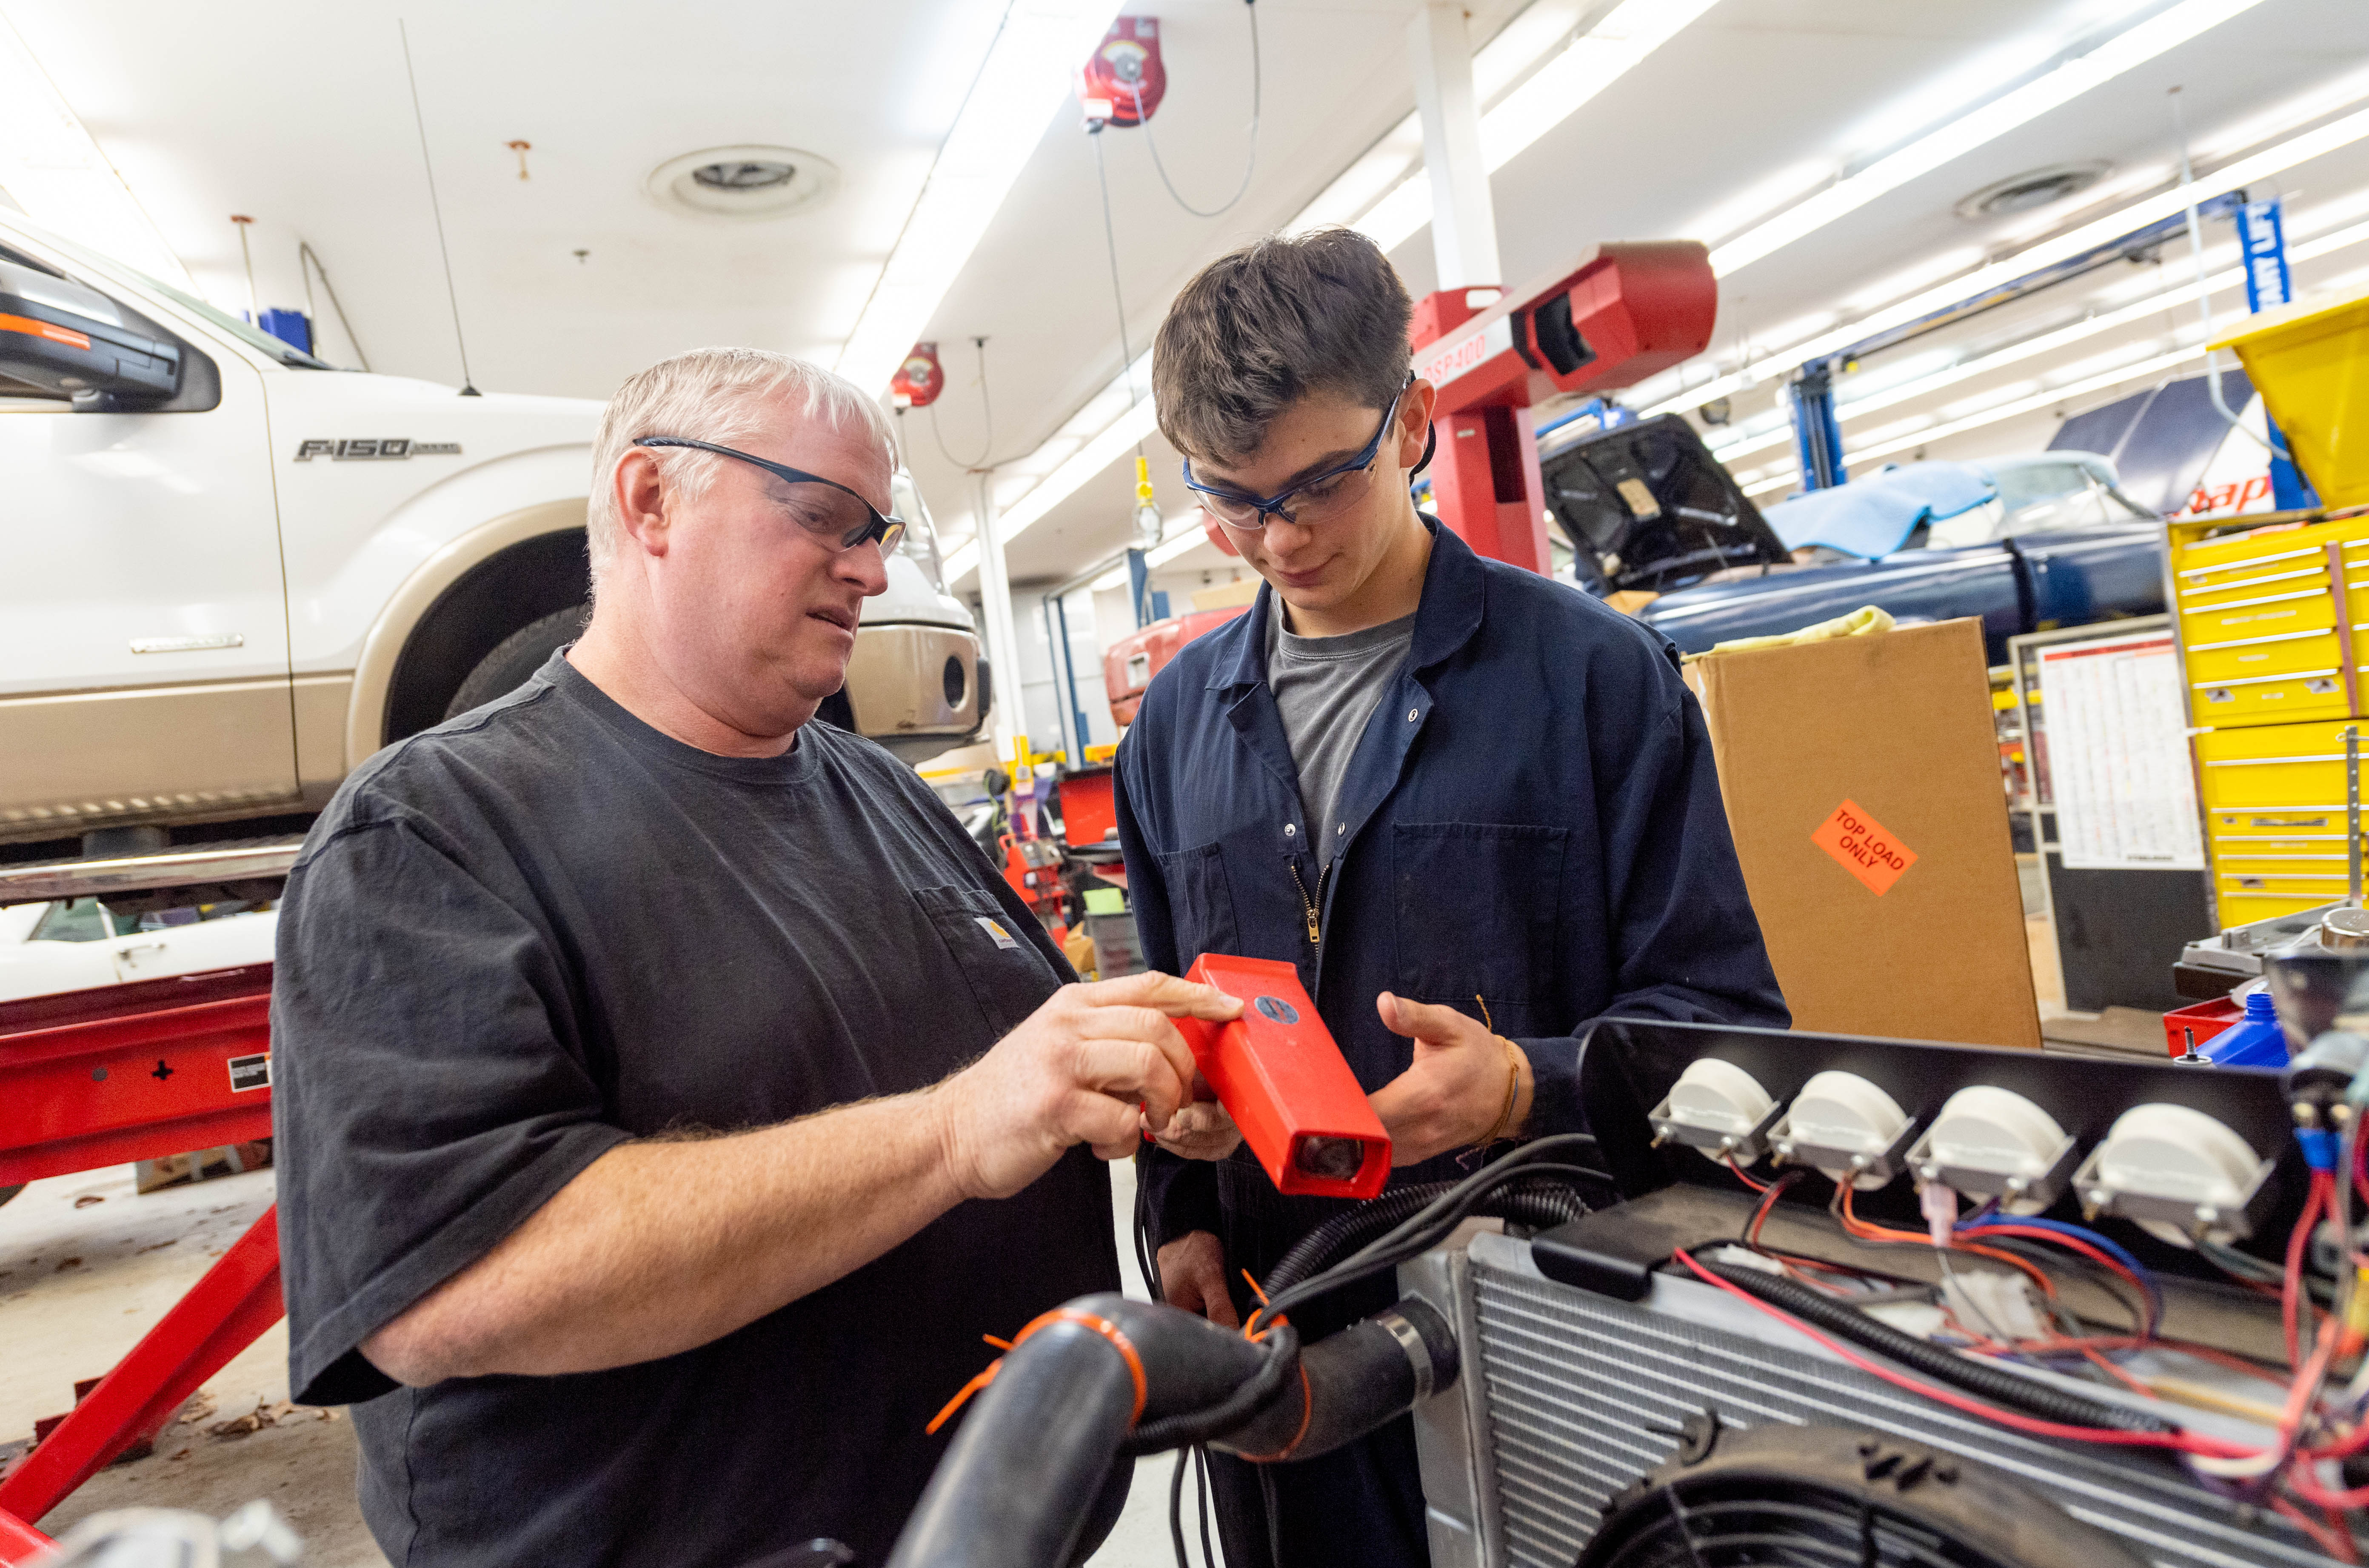 Half a Century of Inspiring Kids: Two Auto Shop Teachers, FCPS Grads, and Lifelong Friends Recount Decades of Making a Difference